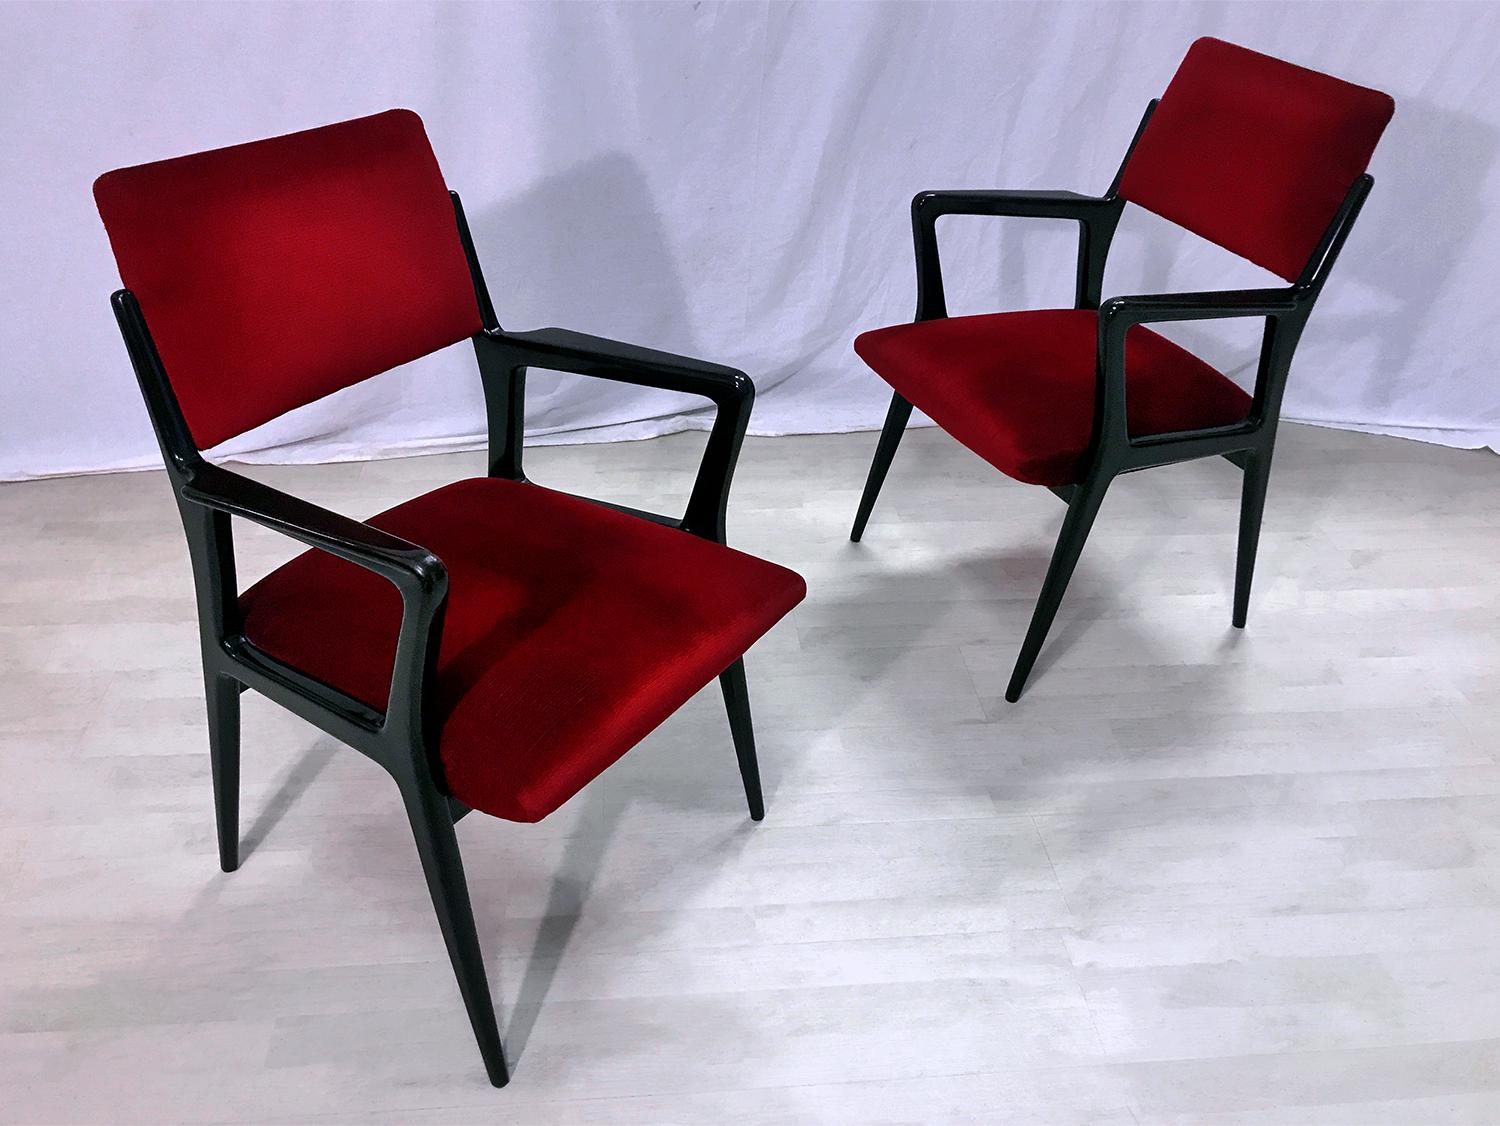 Very stylish Italian midcentury pair of Armchairs original of the 1950s, upholstered in a gorgeous deep scarlet red velvet.
The armchairs are ready to use.
Their structures, made of ebonized wood polished, are solid and in very good conditions of